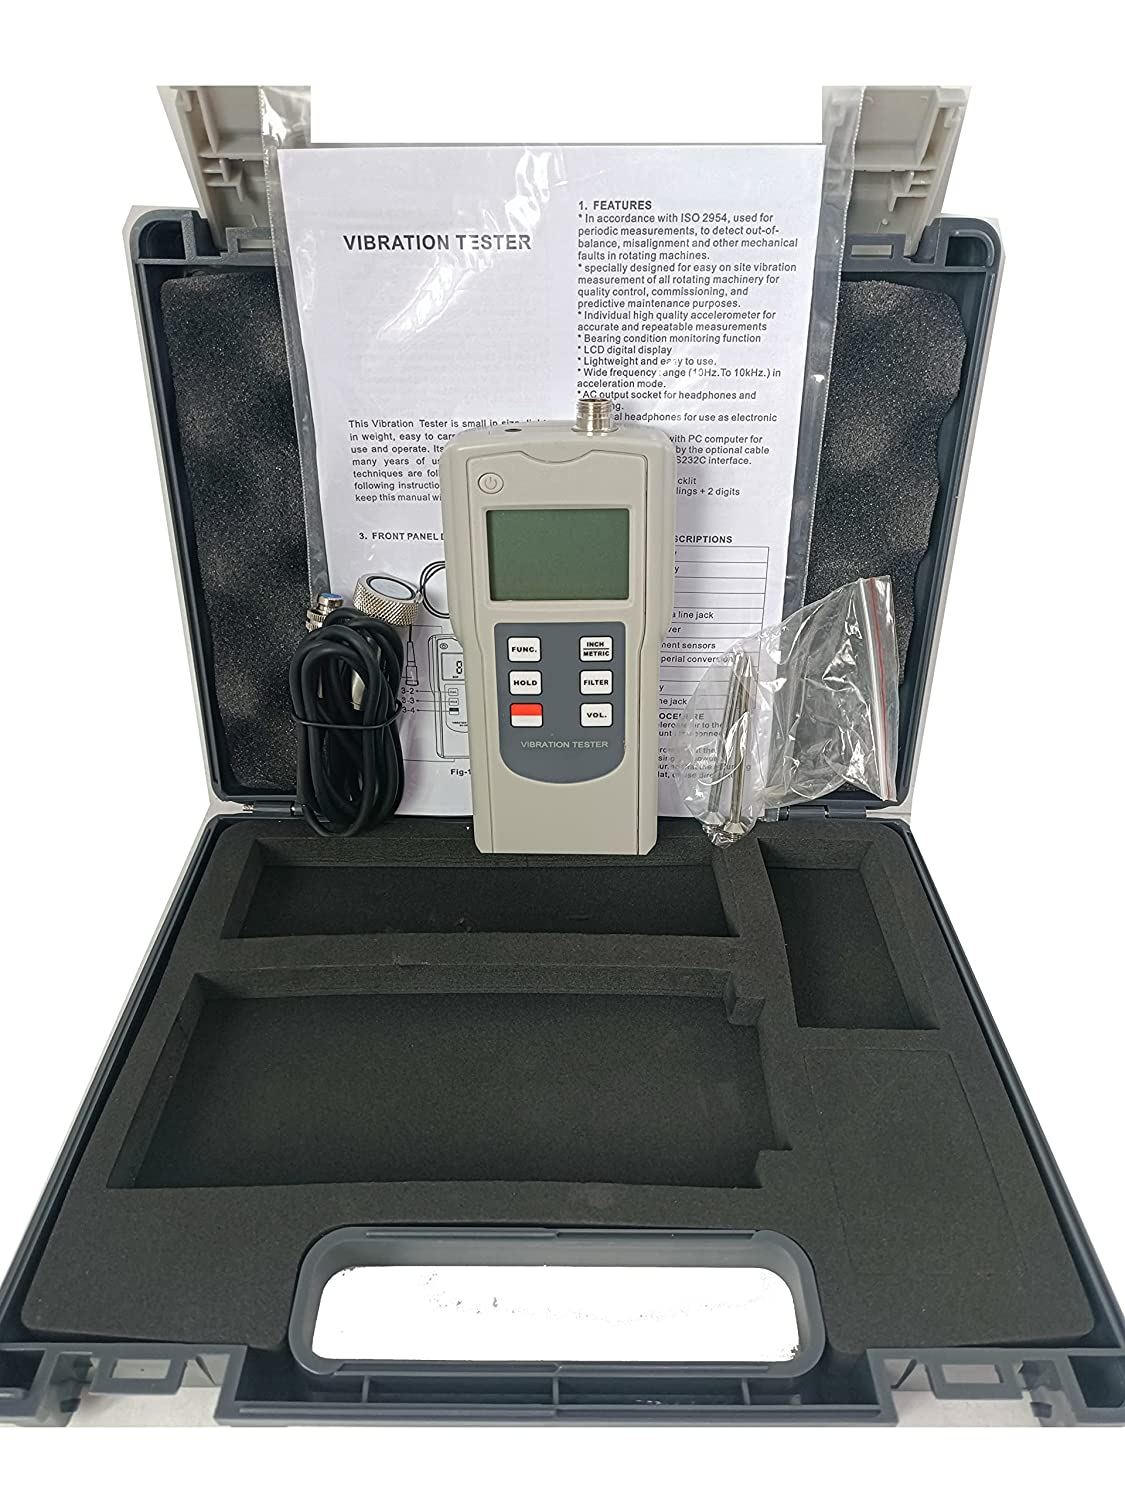 VTSYIQI Digital Vibration Meter Vibrometer Analyzer Datalogger with 3 Parameters Displacement Velocity and Acceleration